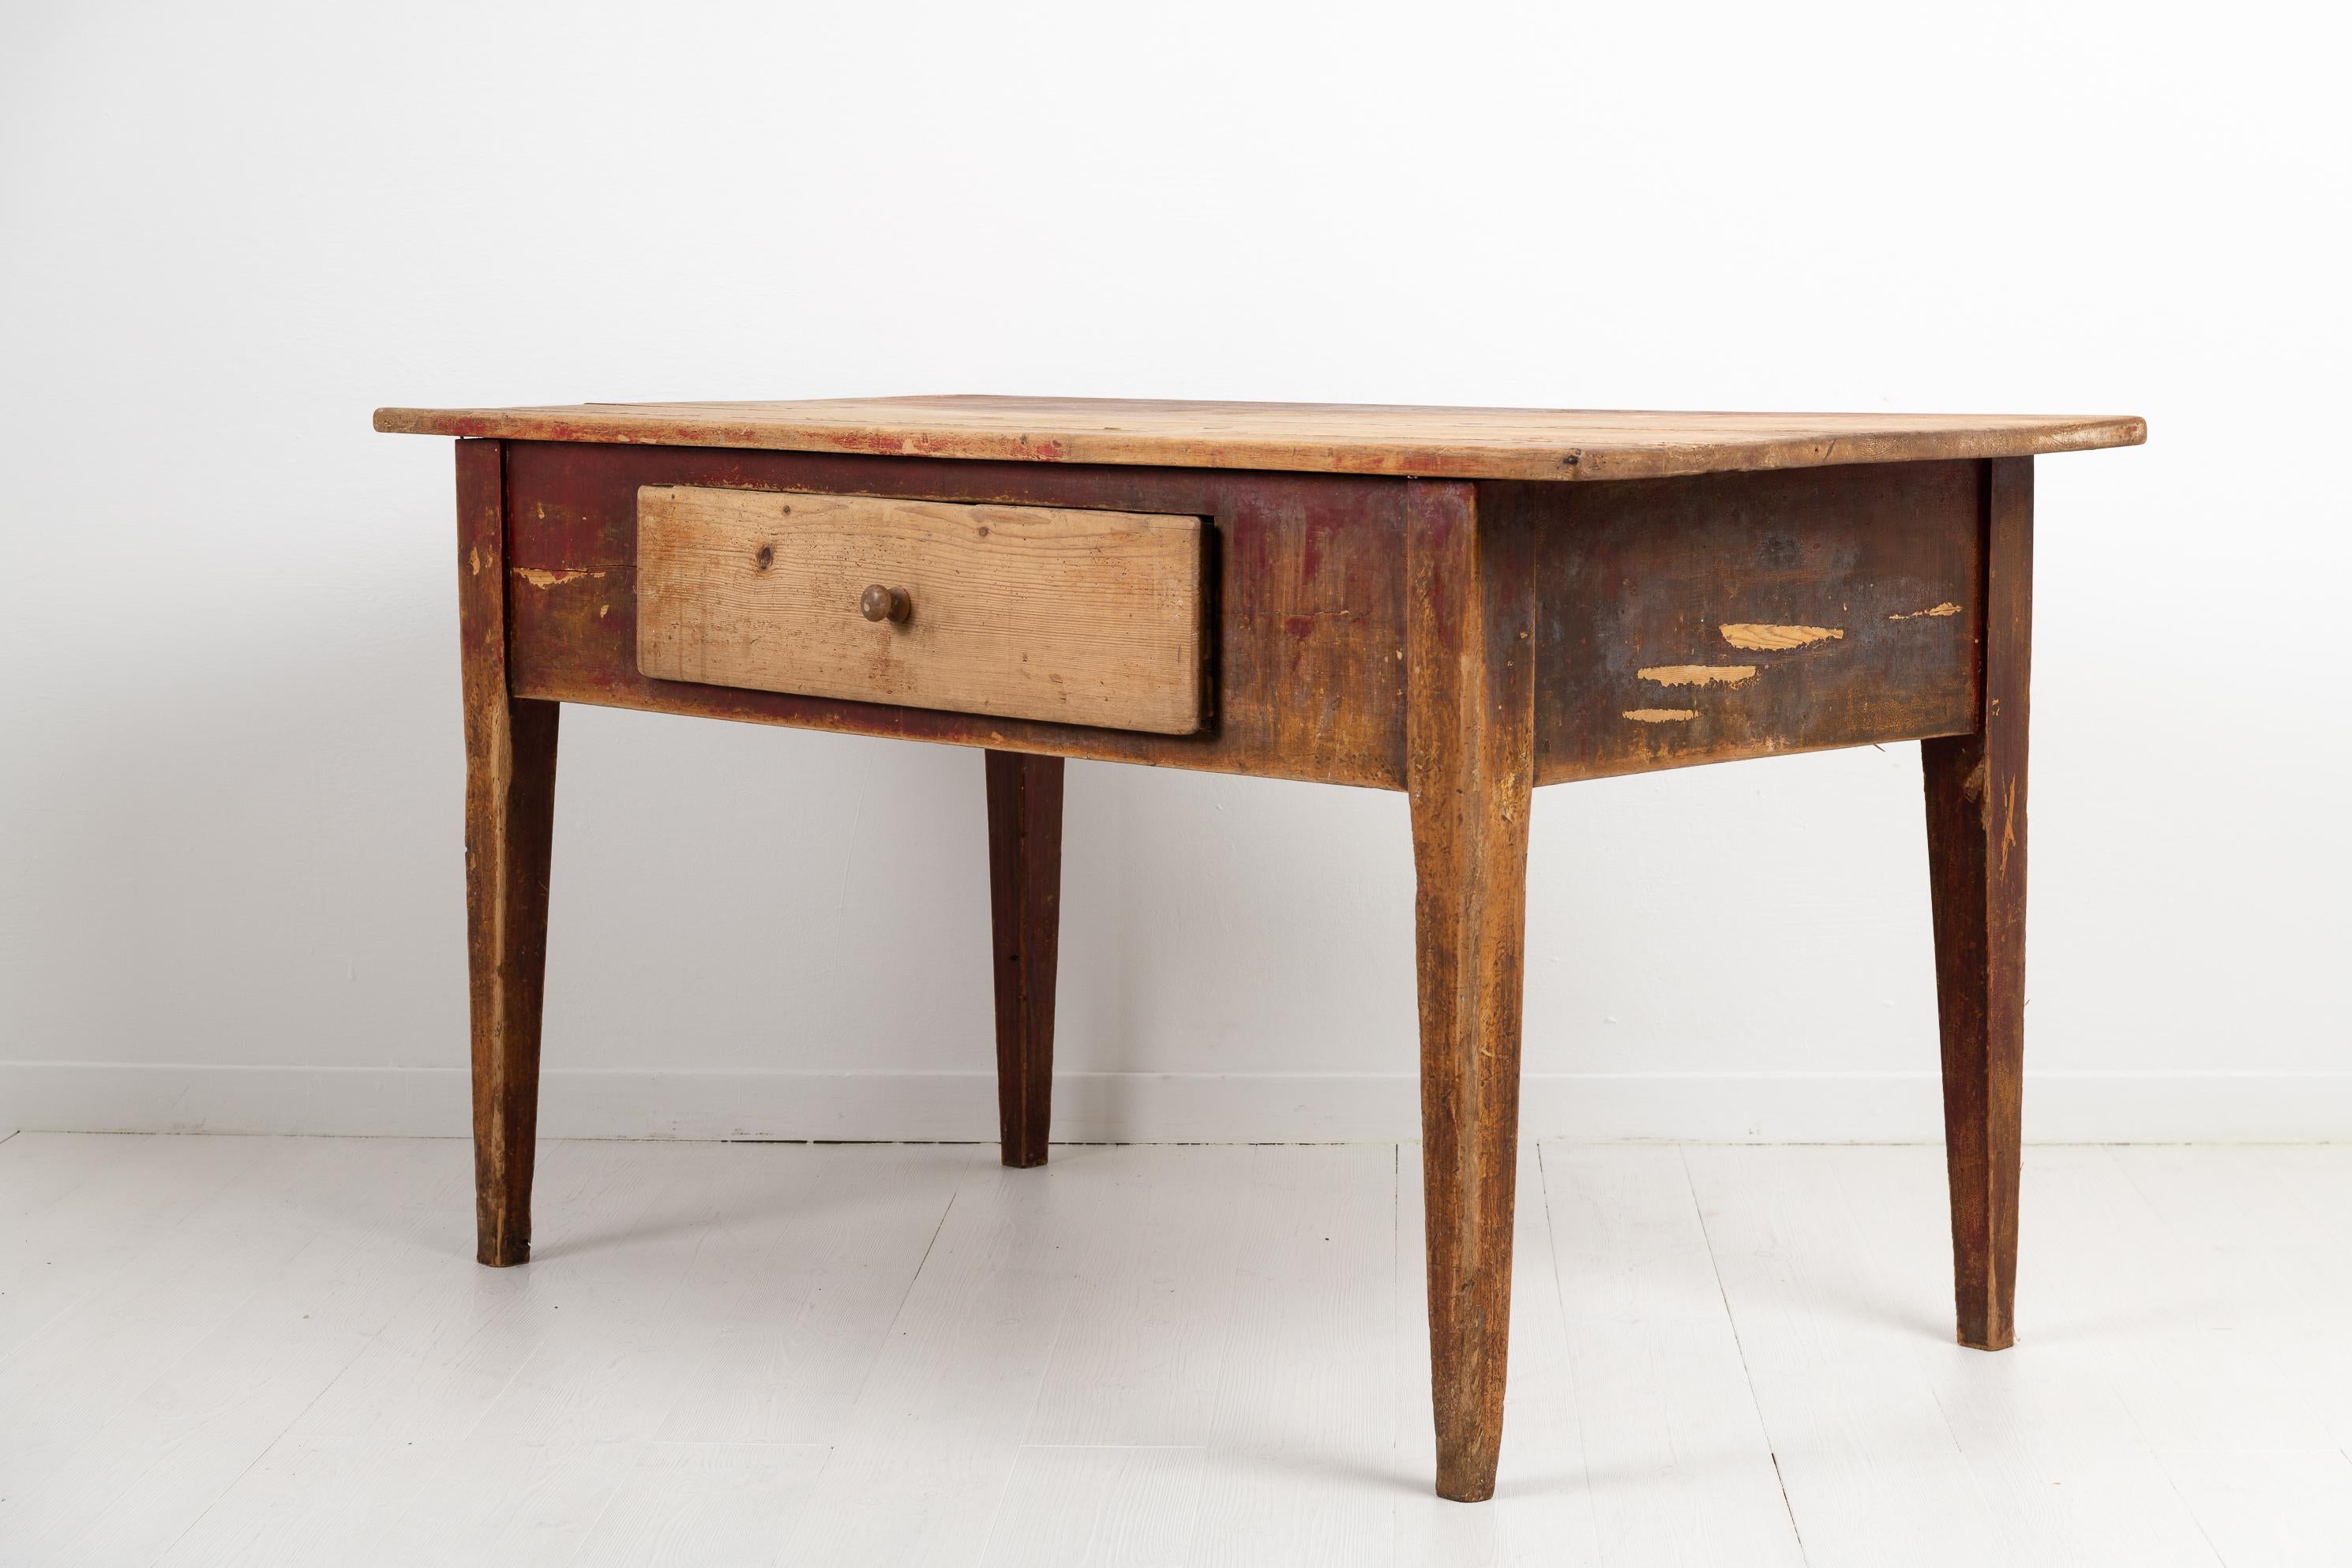 Early 19th Century Swedish Gustavian Style Country Work Table In Good Condition For Sale In Kramfors, SE